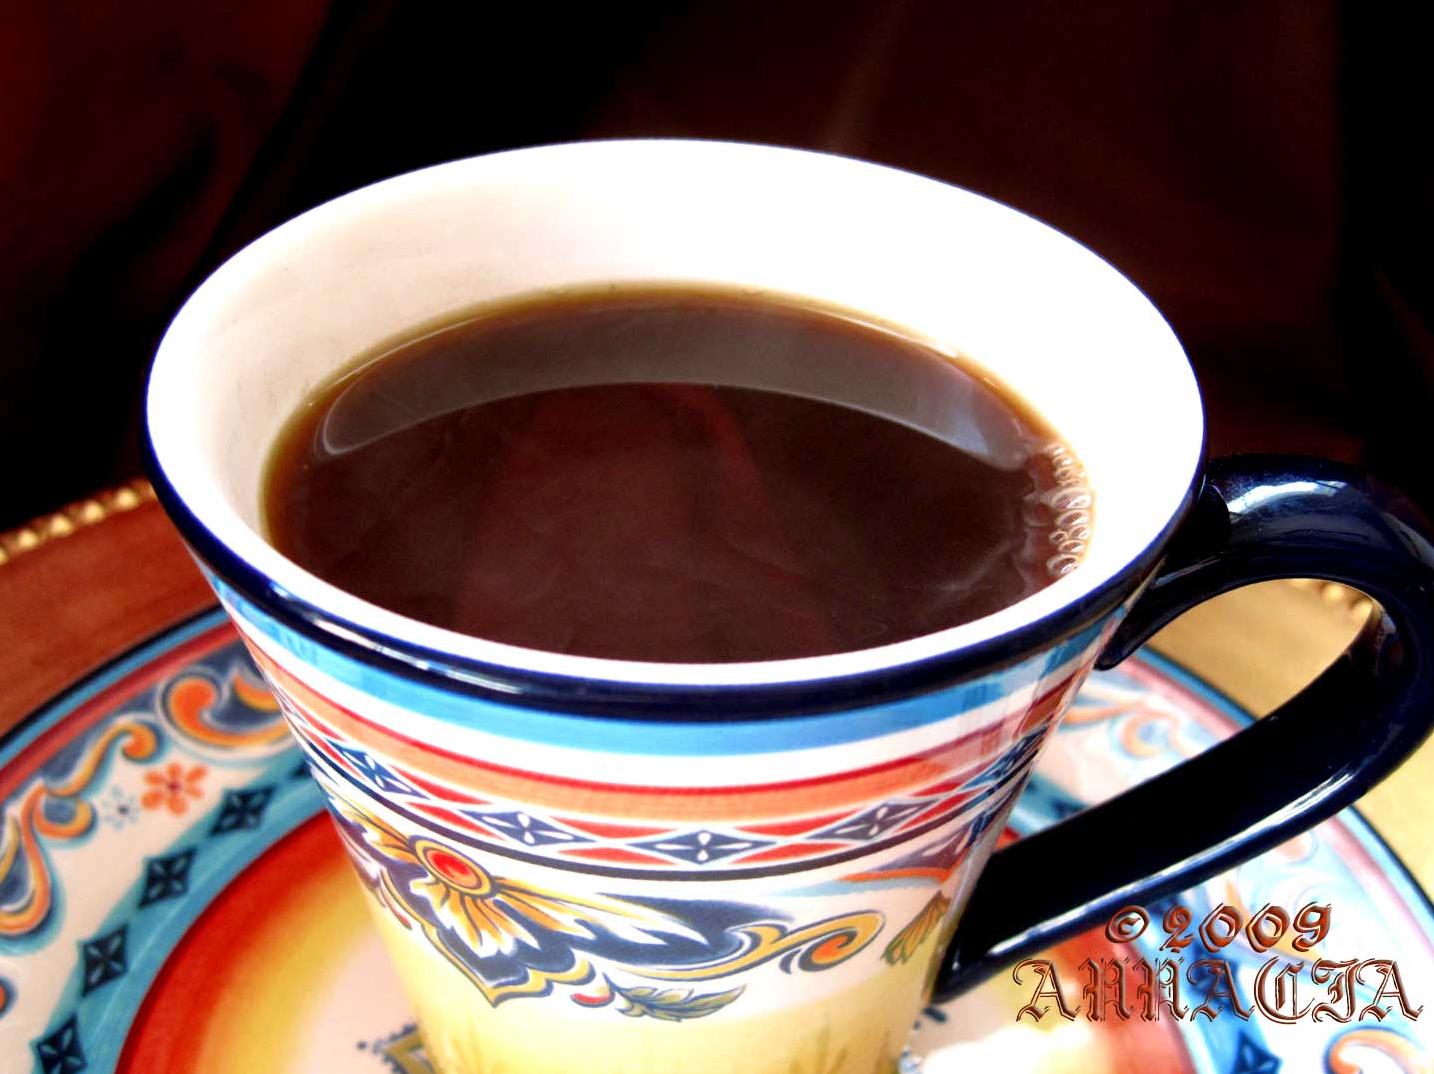  Kick your taste buds with this gingery Qishr coffee recipe